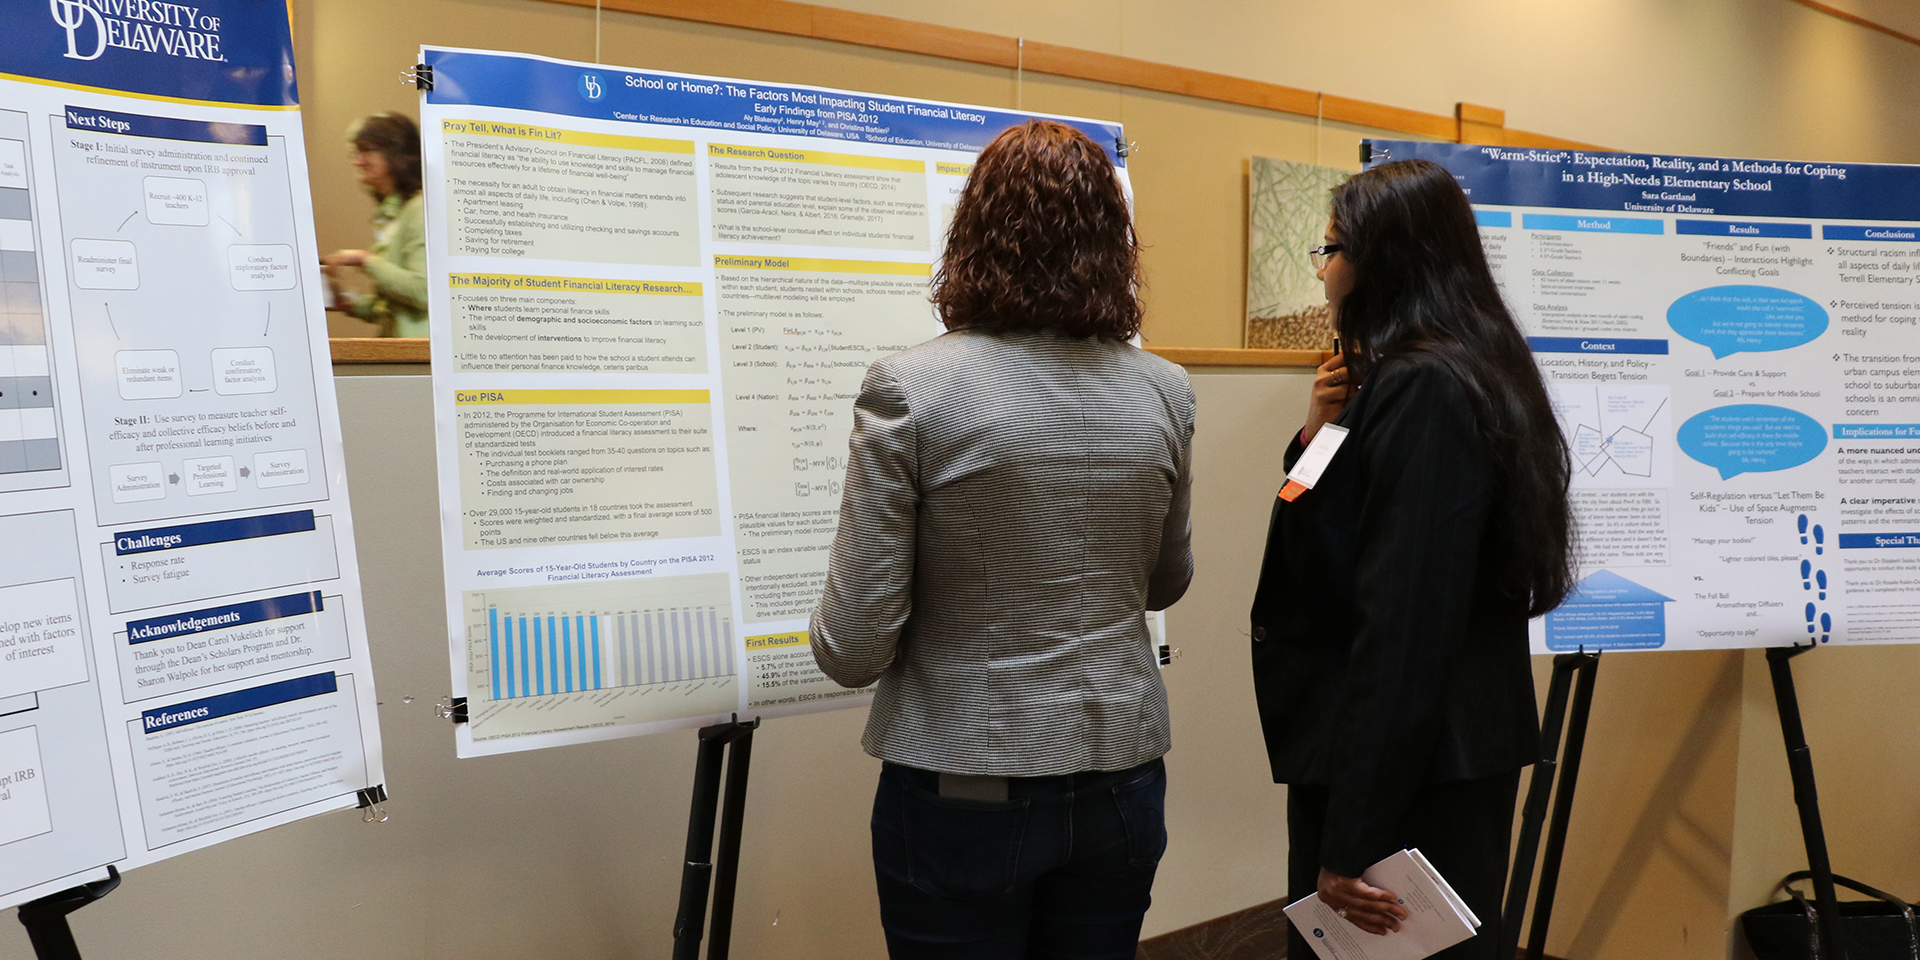 Two students review research poster at Steele Symposium